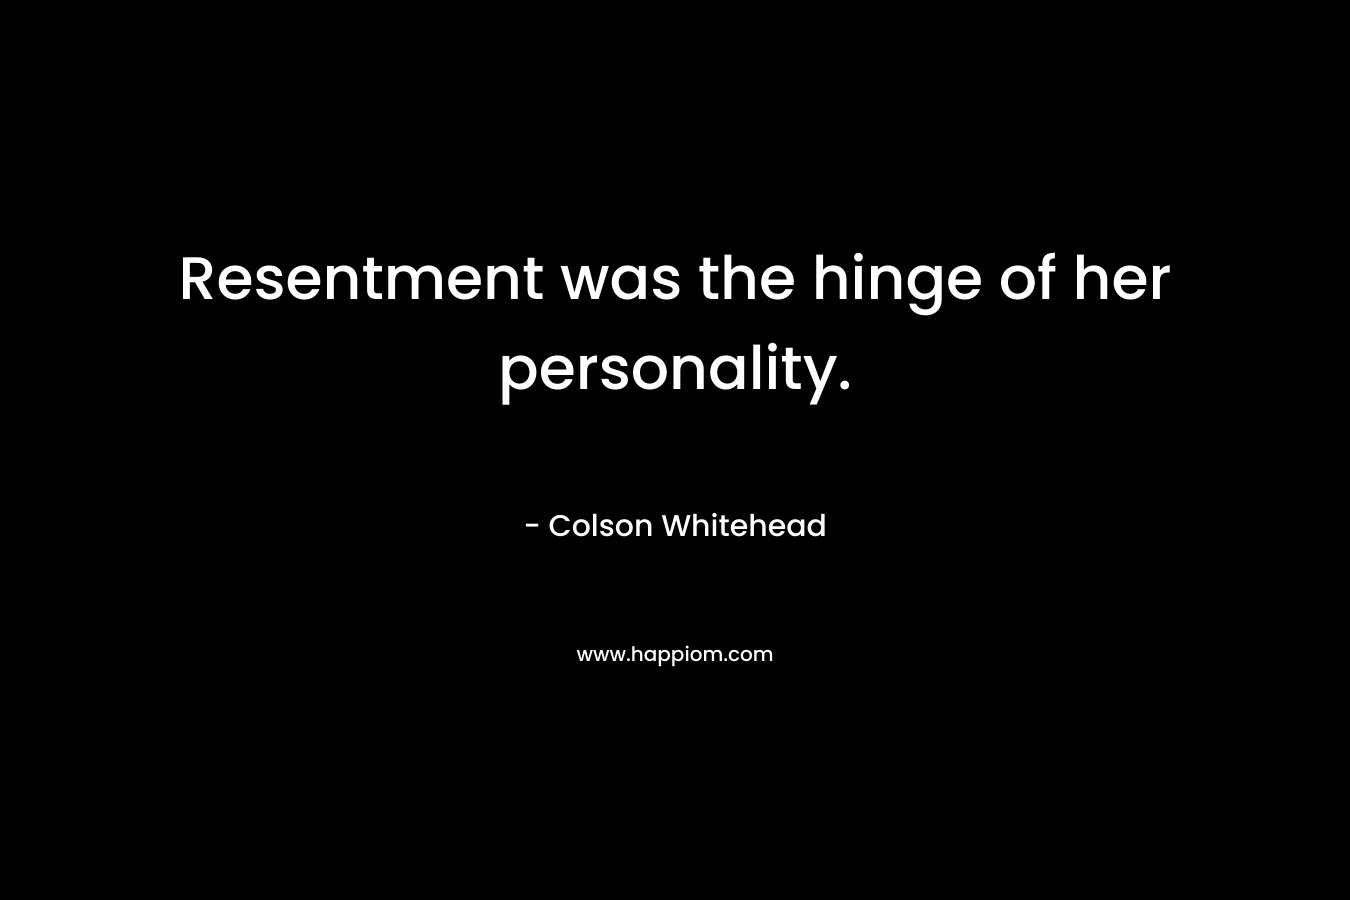 Resentment was the hinge of her personality.